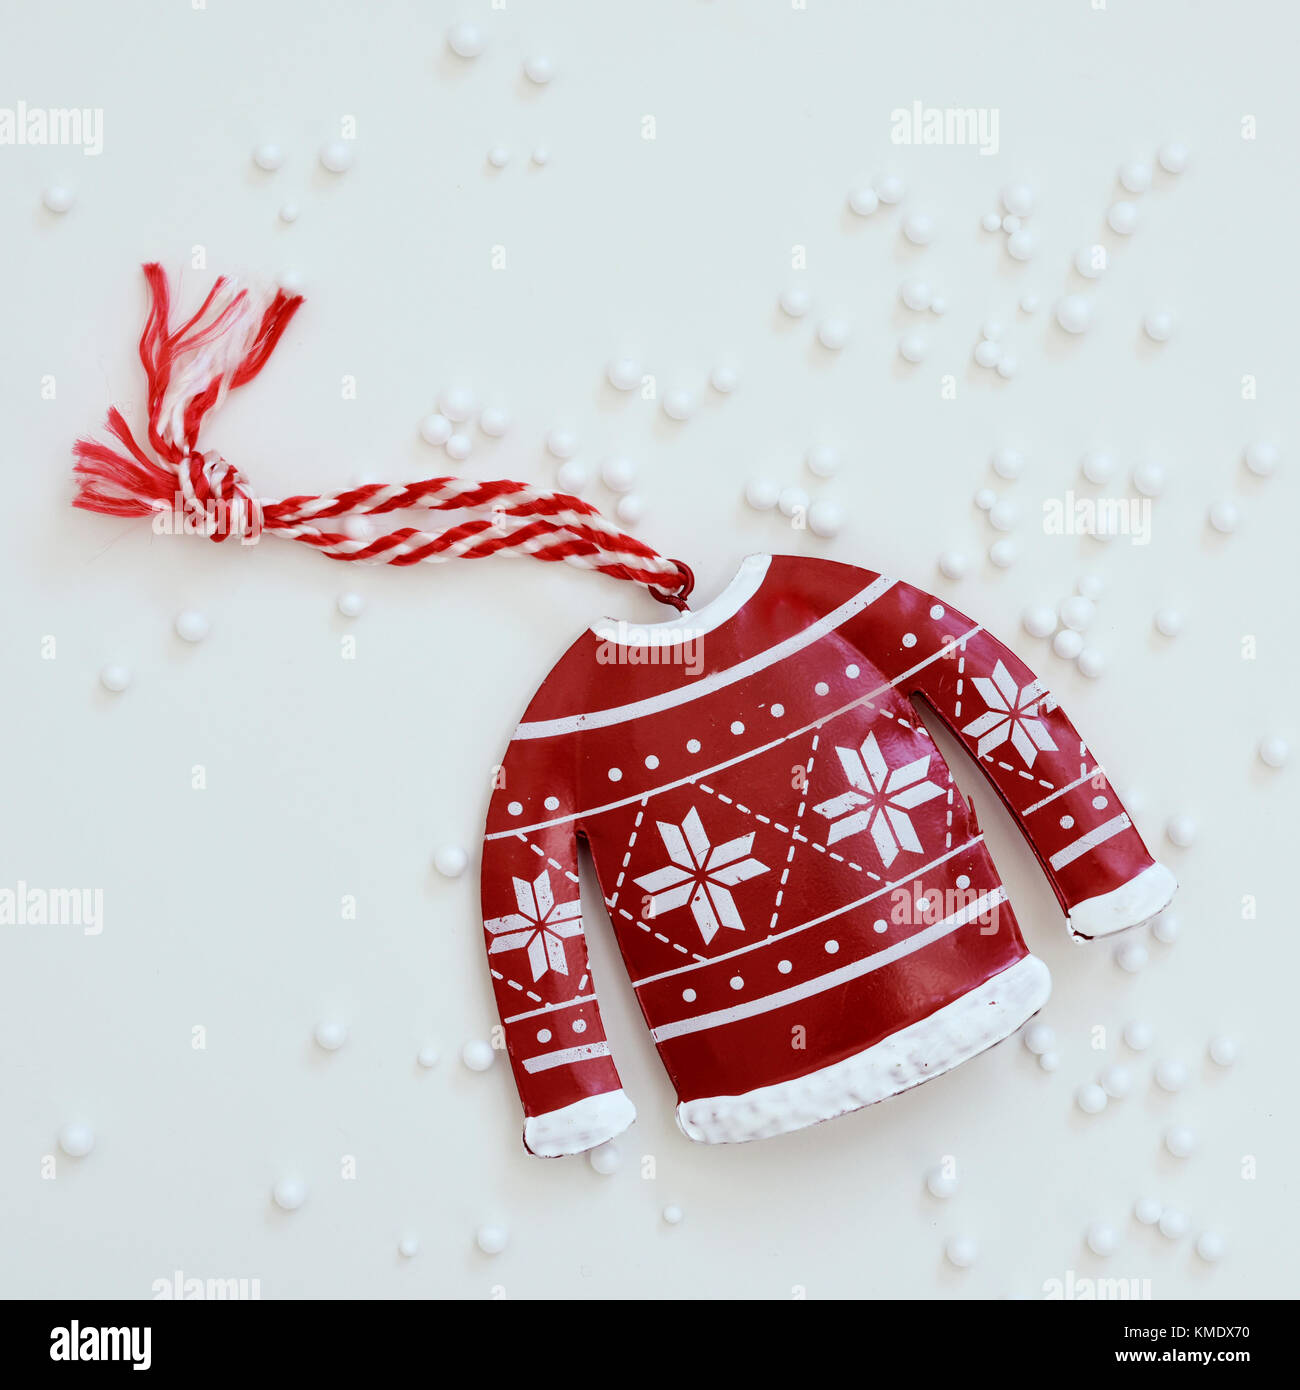 high-angle shot of a christmas ornament placed on a white surface sprinkled with small plastic balls simulating snow Stock Photo